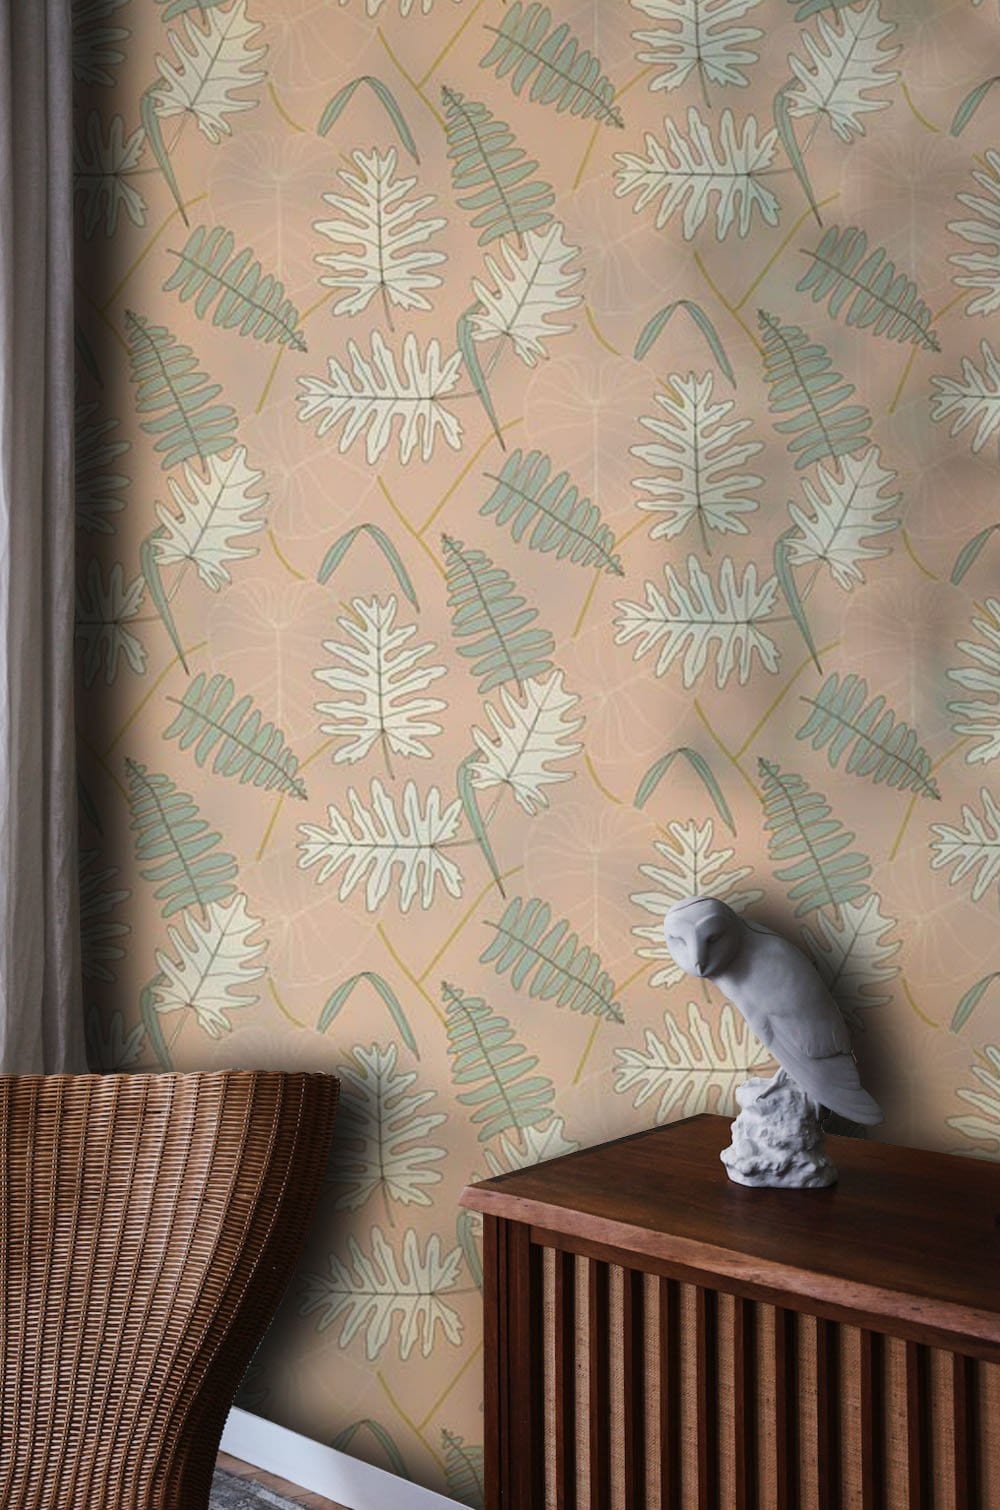 a wallpaper mural with pine leaves on a pink background for the bedroom